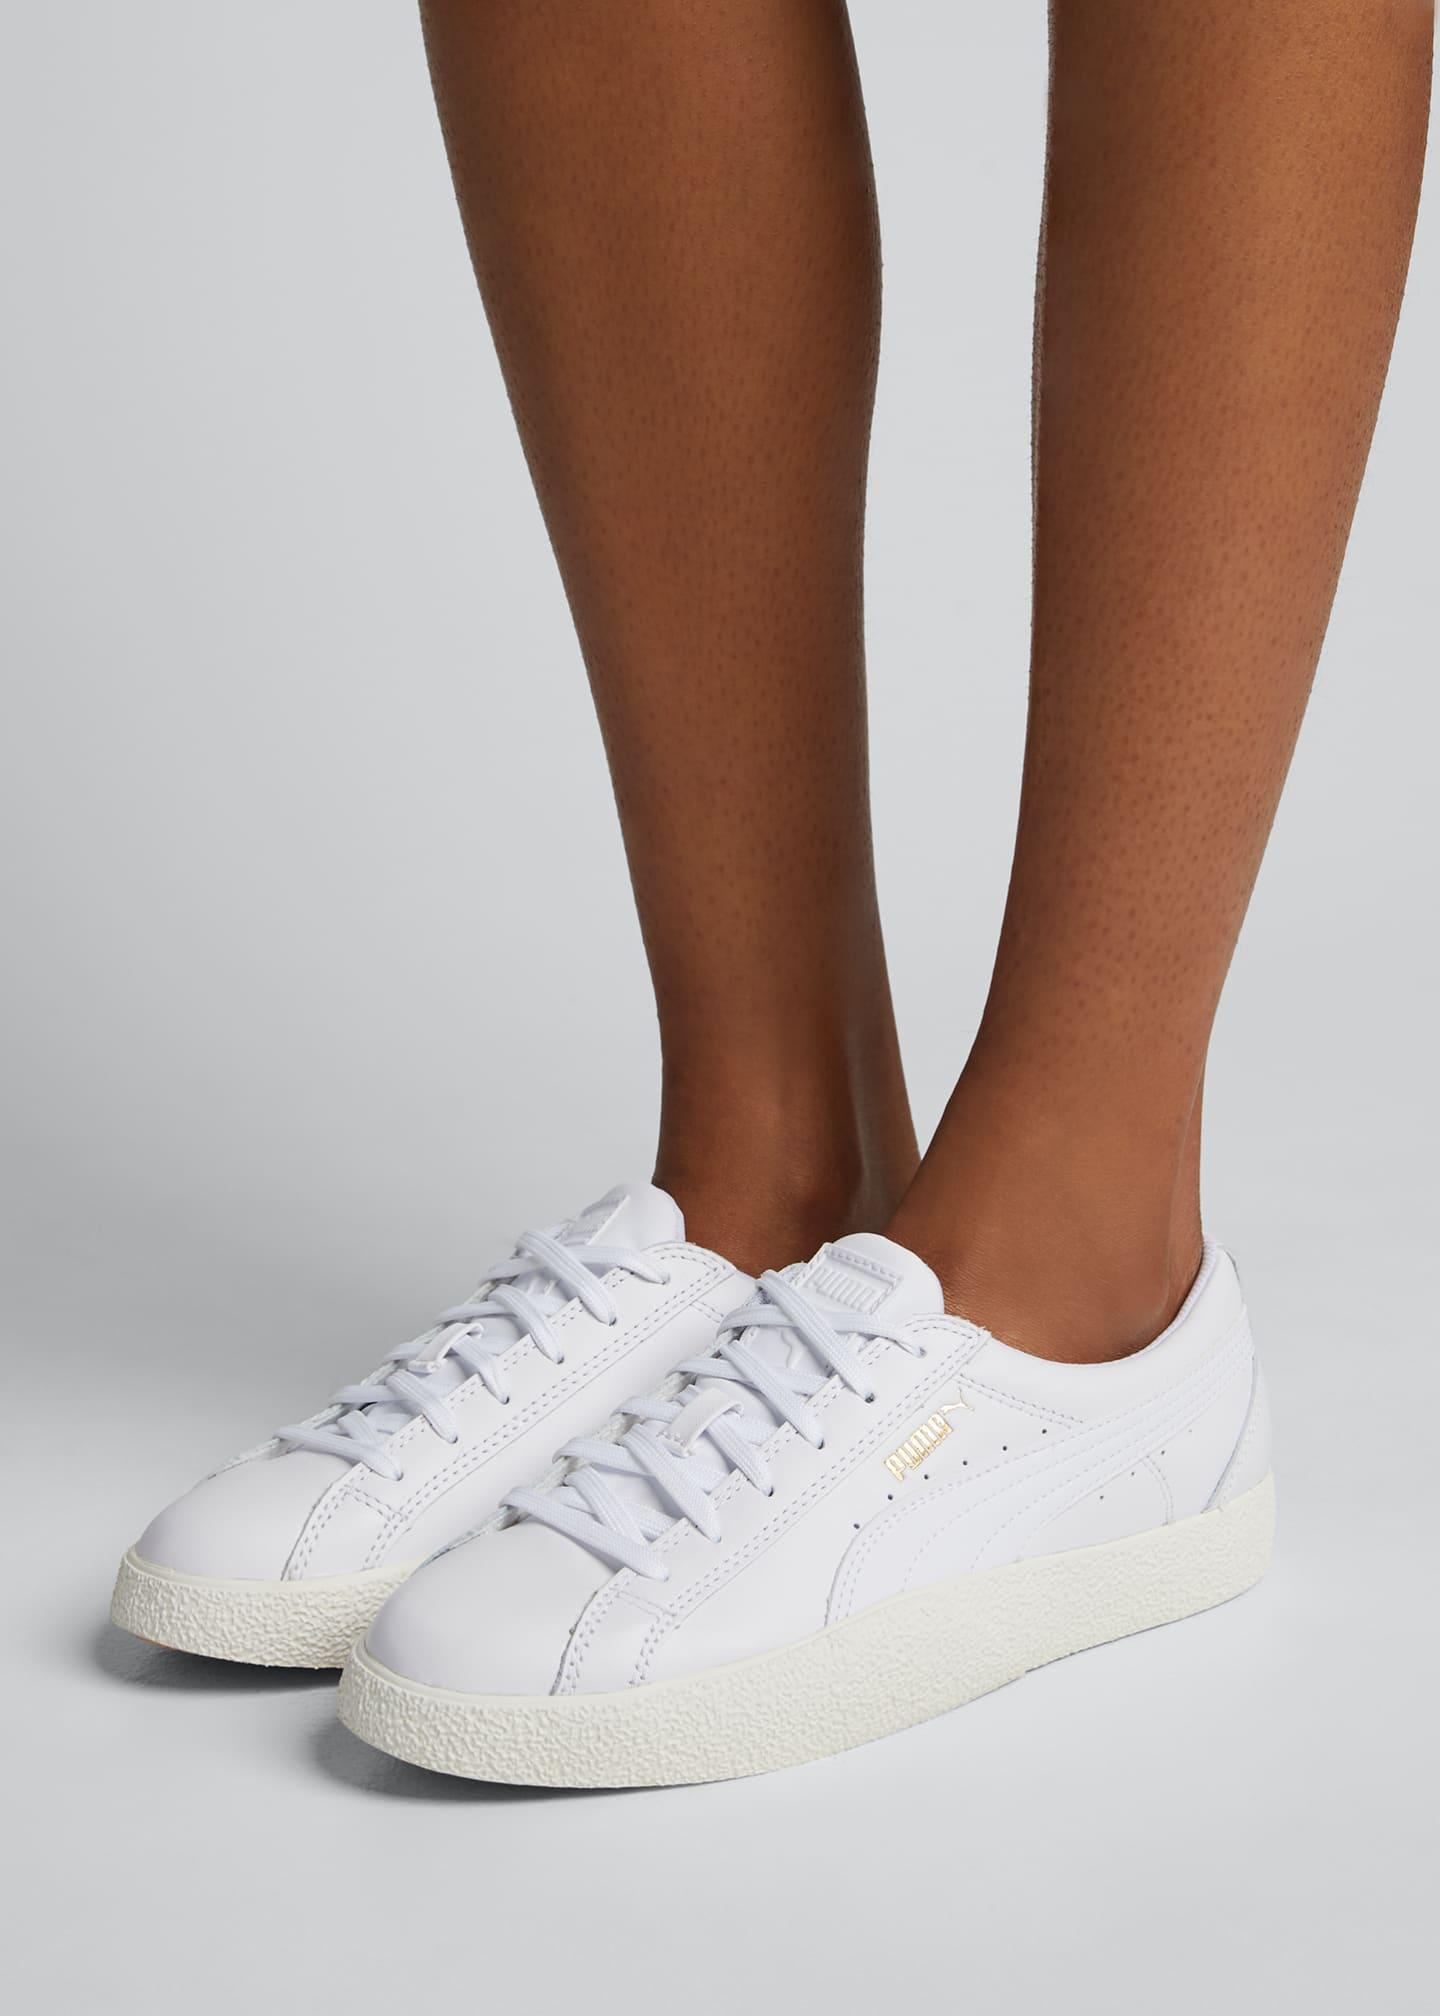 puma leather sneakers